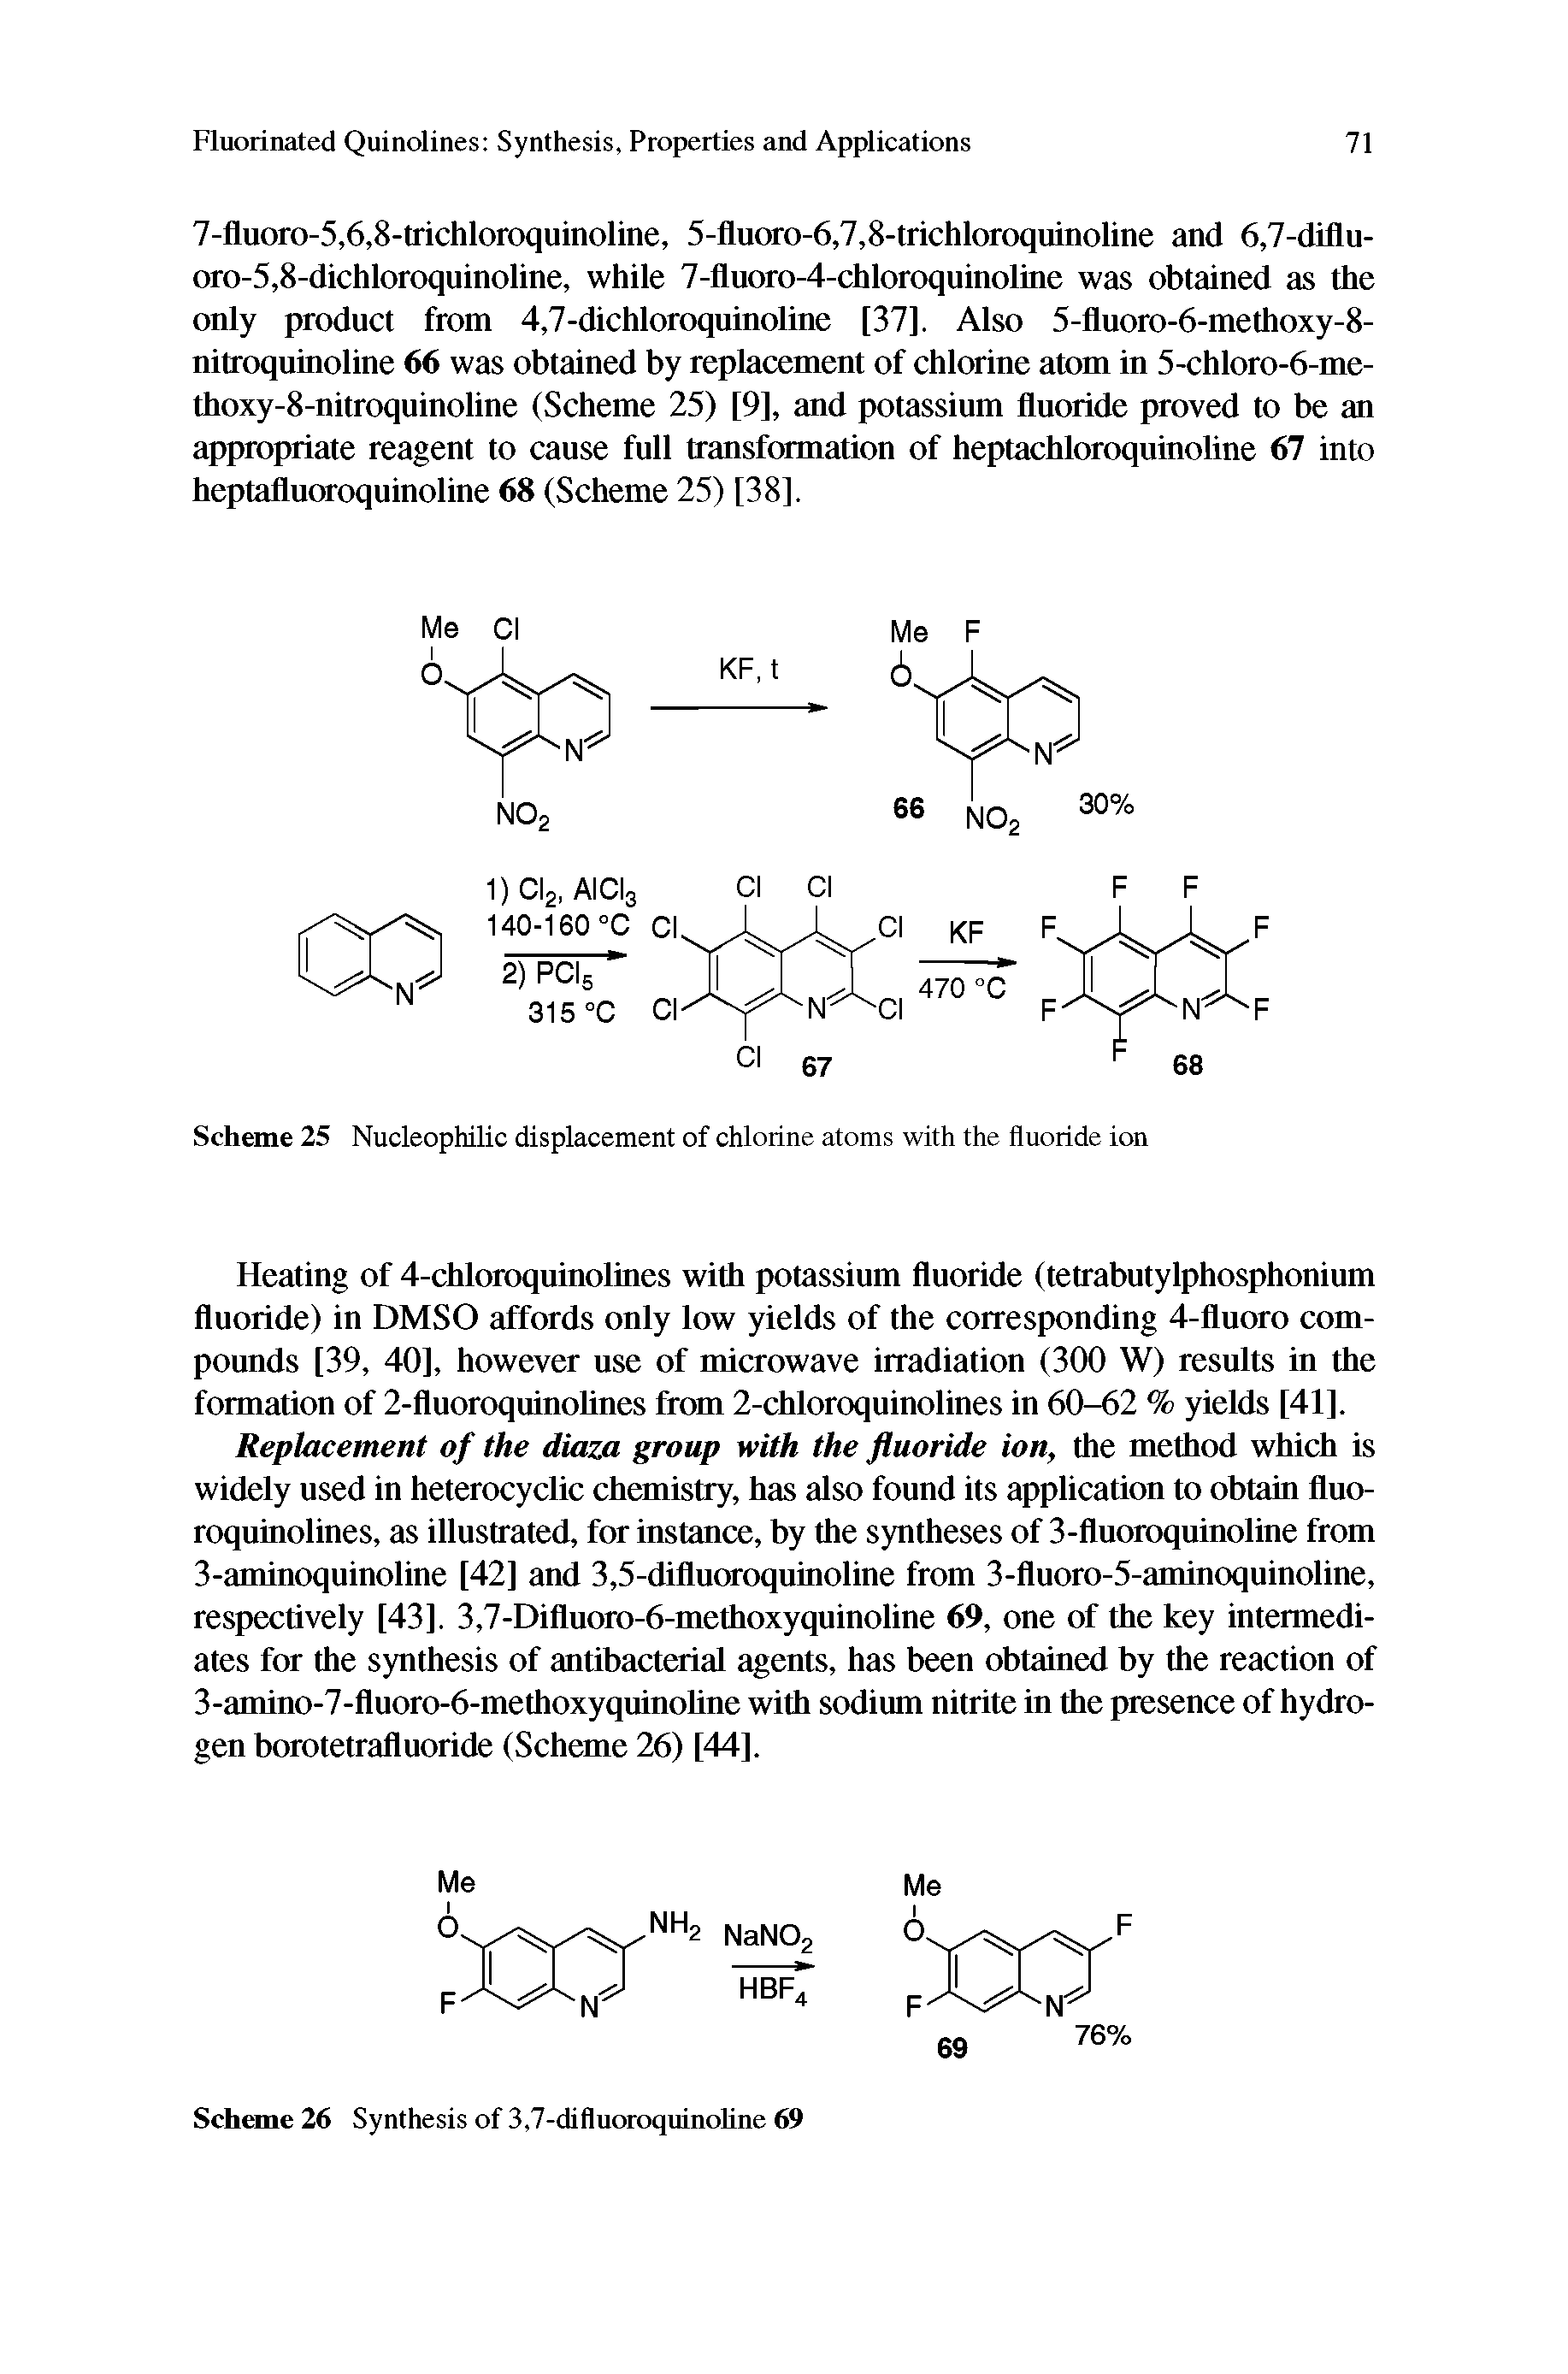 Scheme 25 Nucleophilic displacement of chlorine atoms with the fluoride ion...